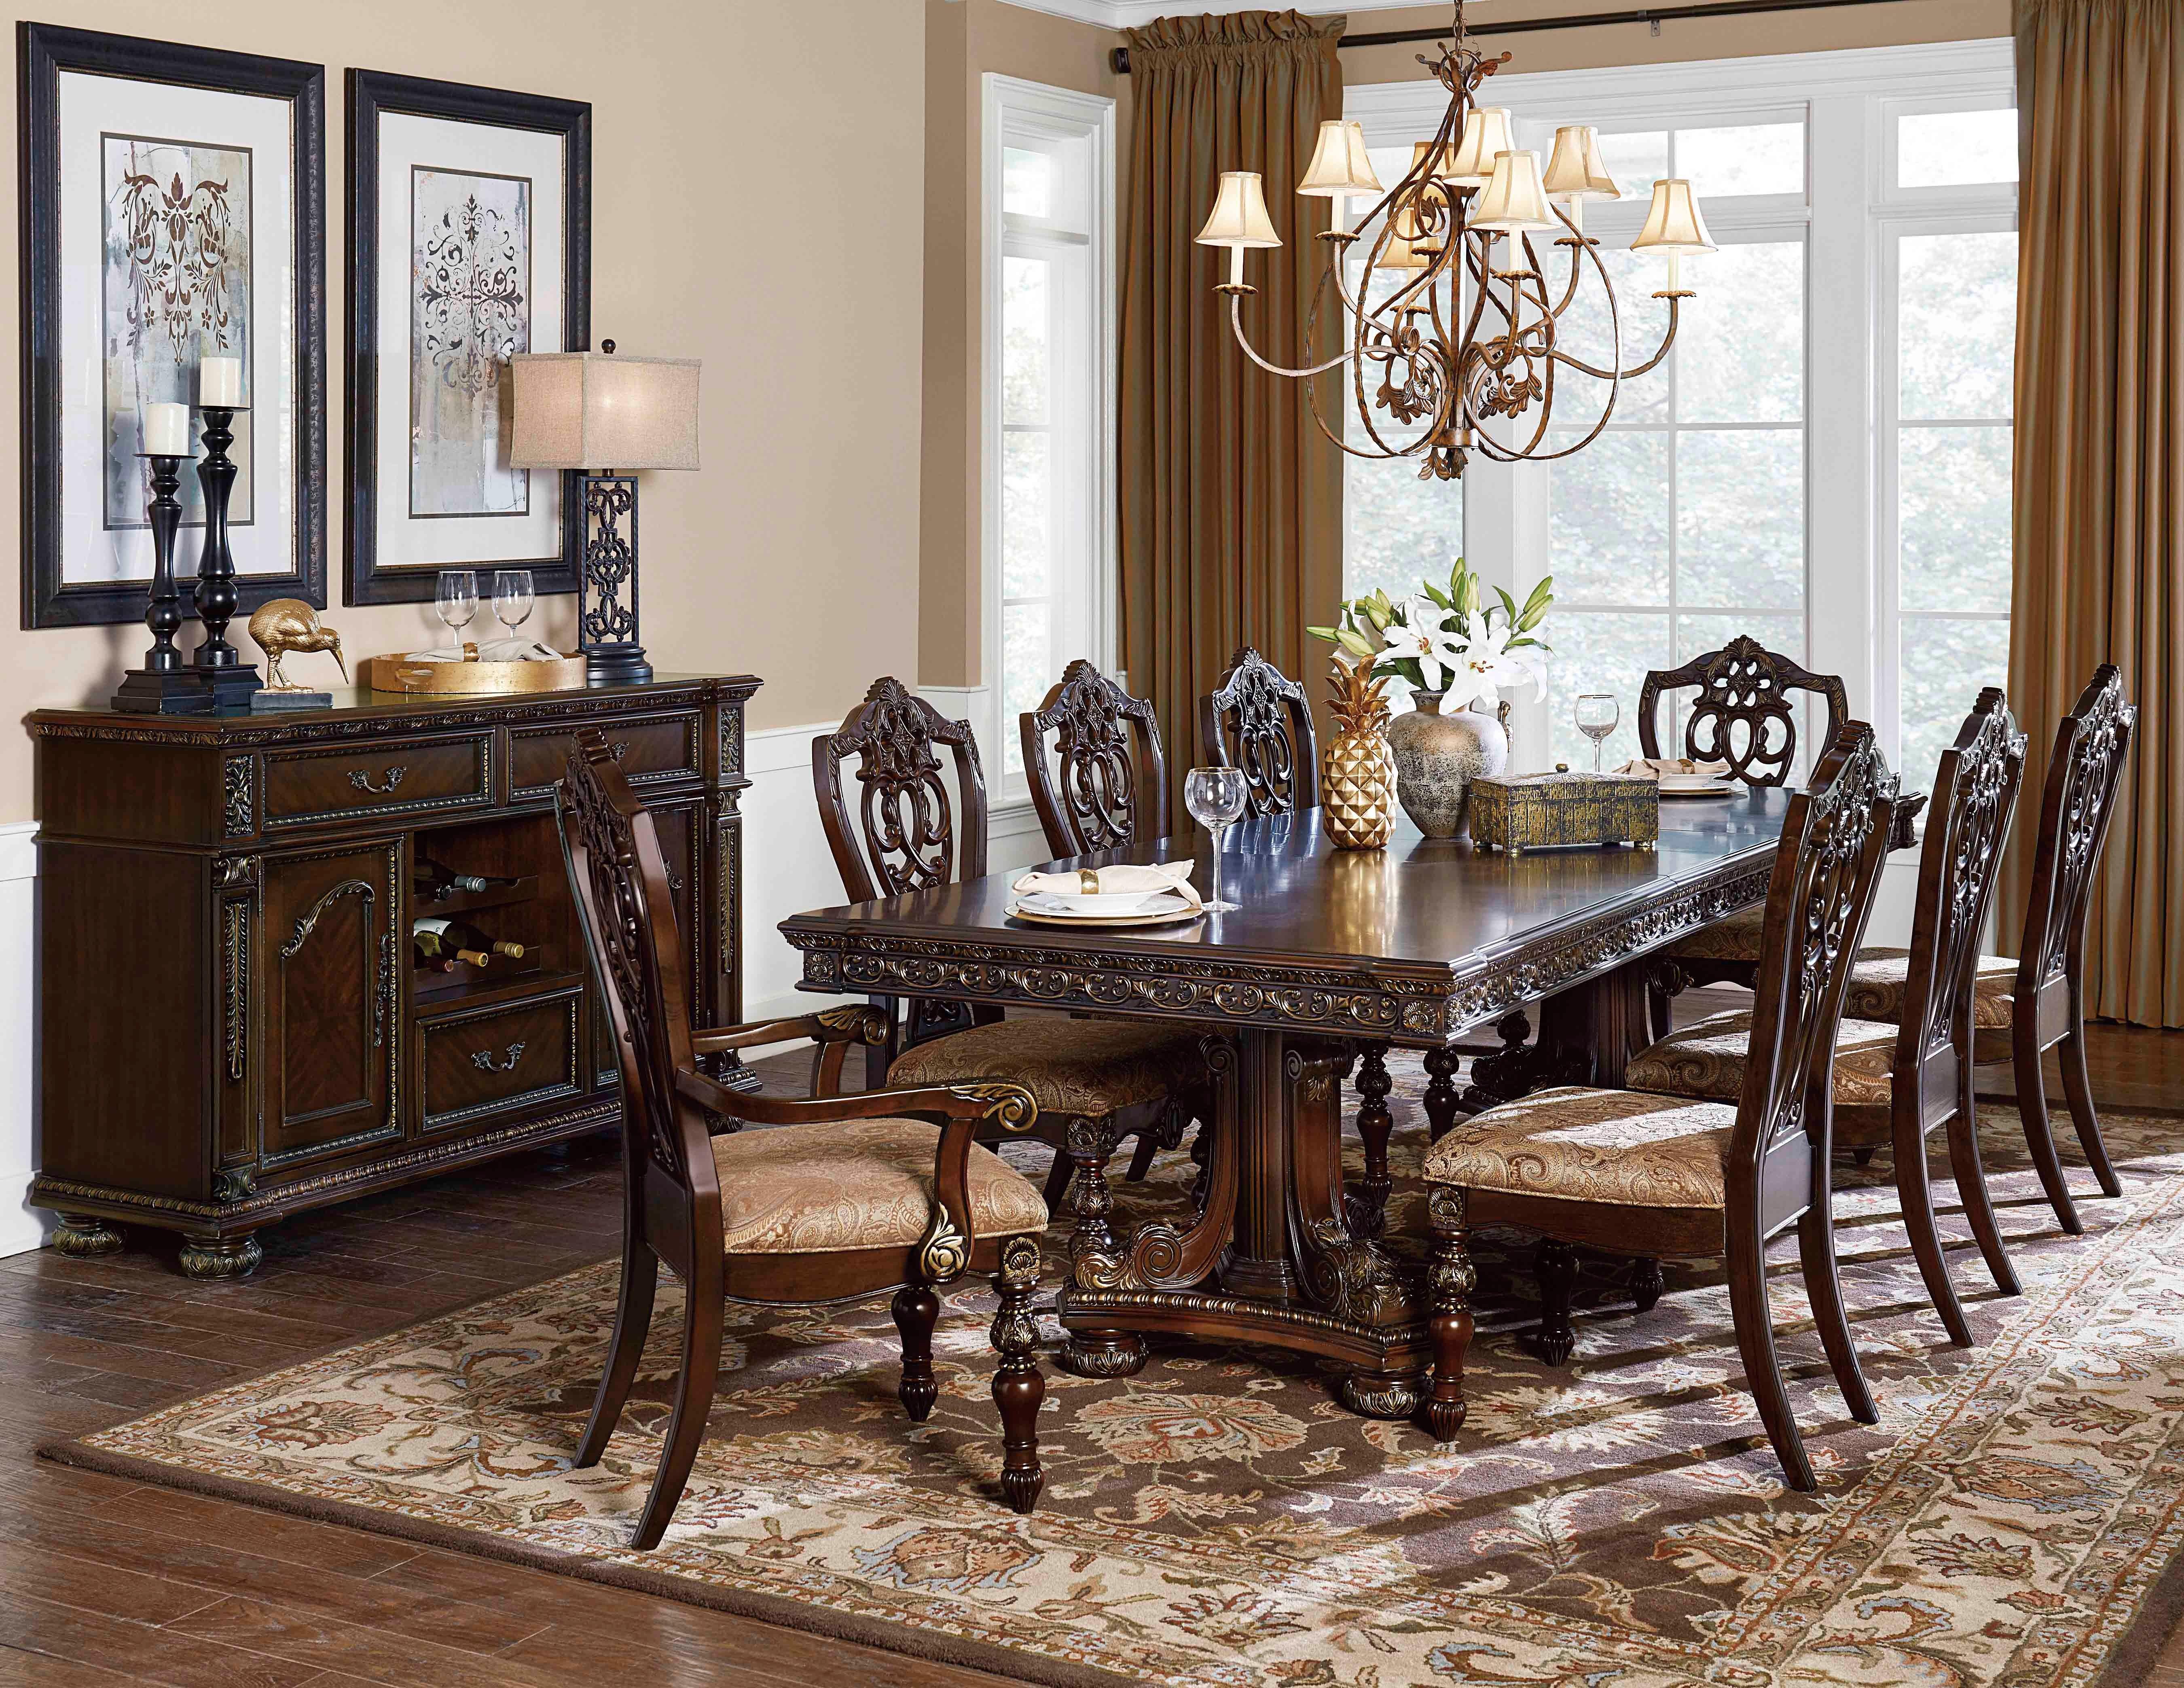 Traditional Dining Room Set 1824-112-SV*10PC Catalonia 1824-112-SV*10PC in Dark Cherry Polyester